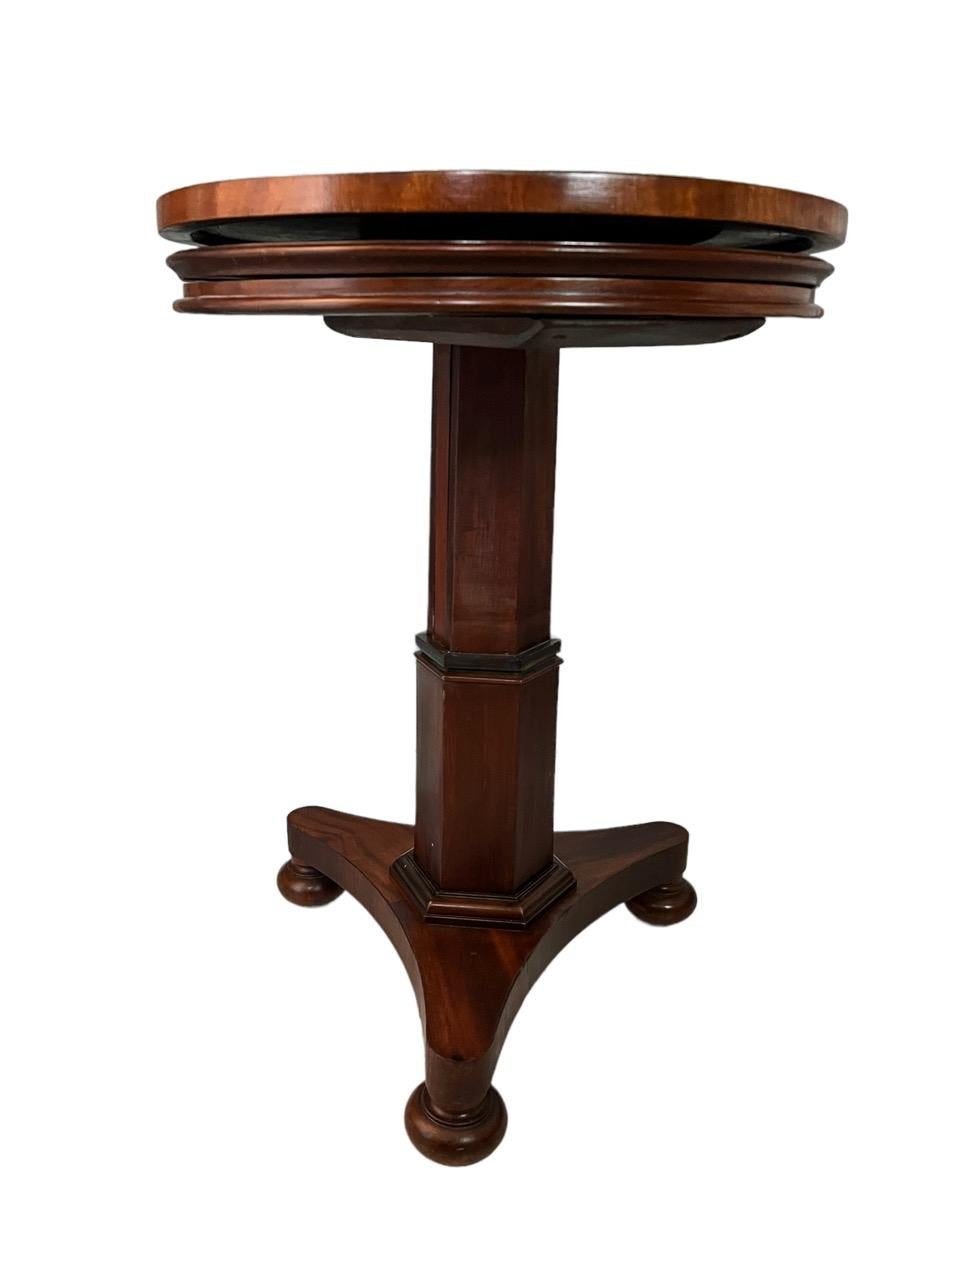 18th Century English Mahogany Expandable Round Three Tier Dumbwaiter Table For Sale 1